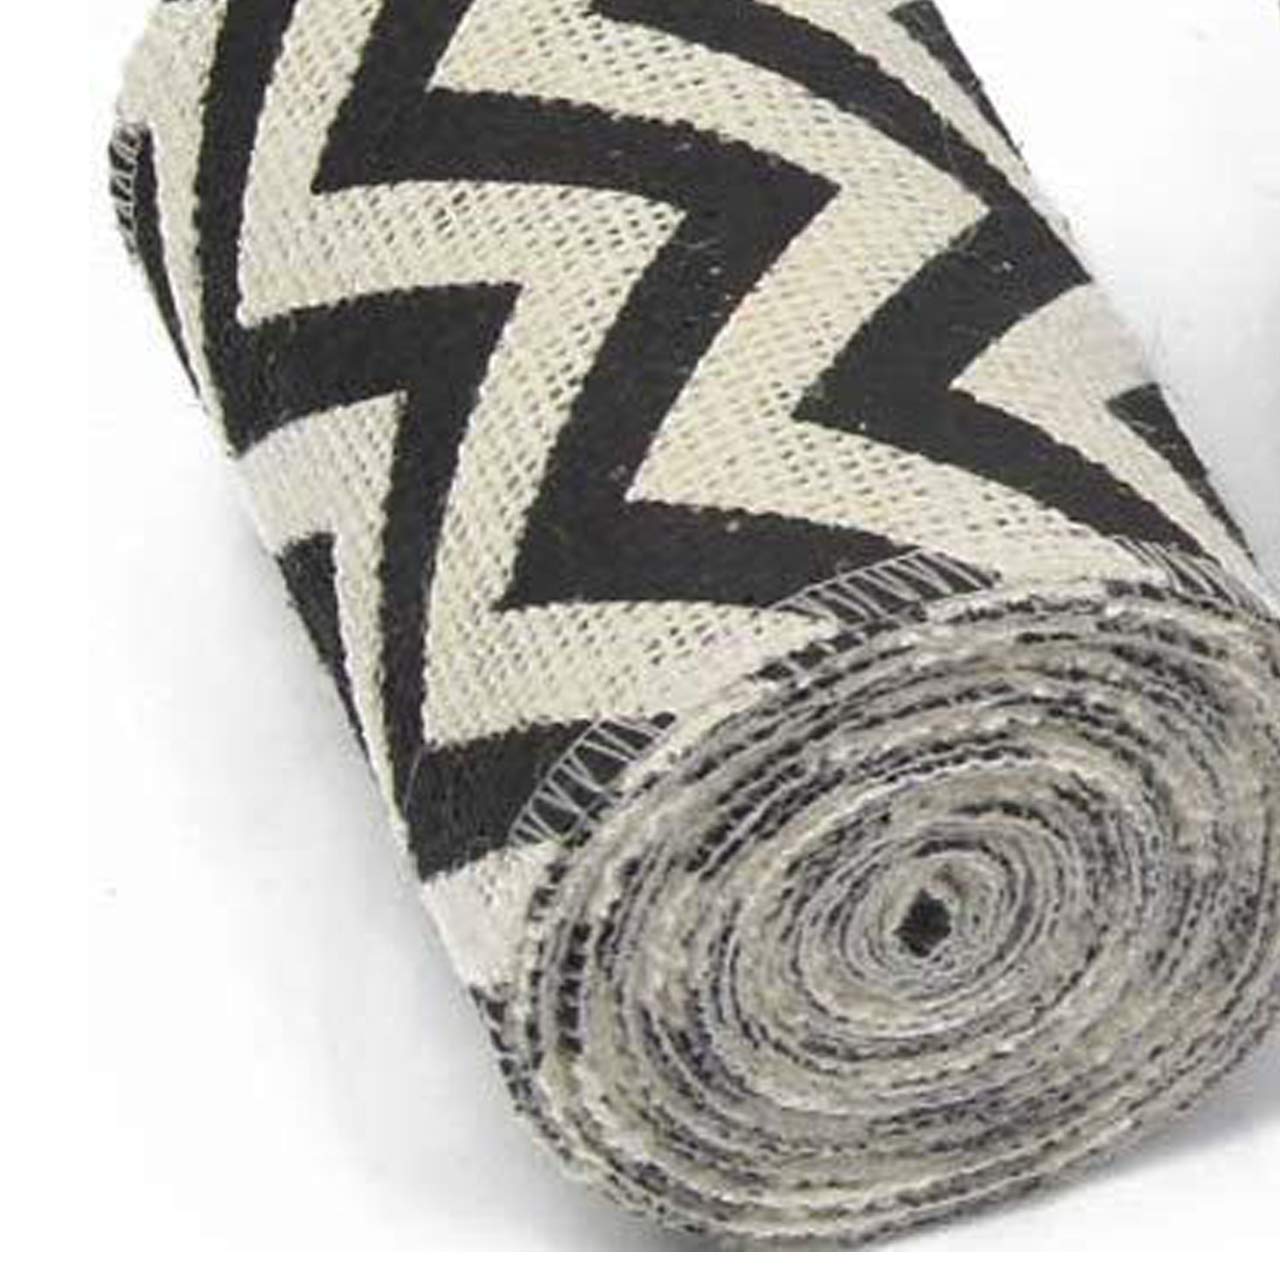 AAYU Natural Burlap Ribbon 3 Inch X 5 Yards Black and White Wave Print Jute Ribbon for Crafts Gift Wrapping Wedding